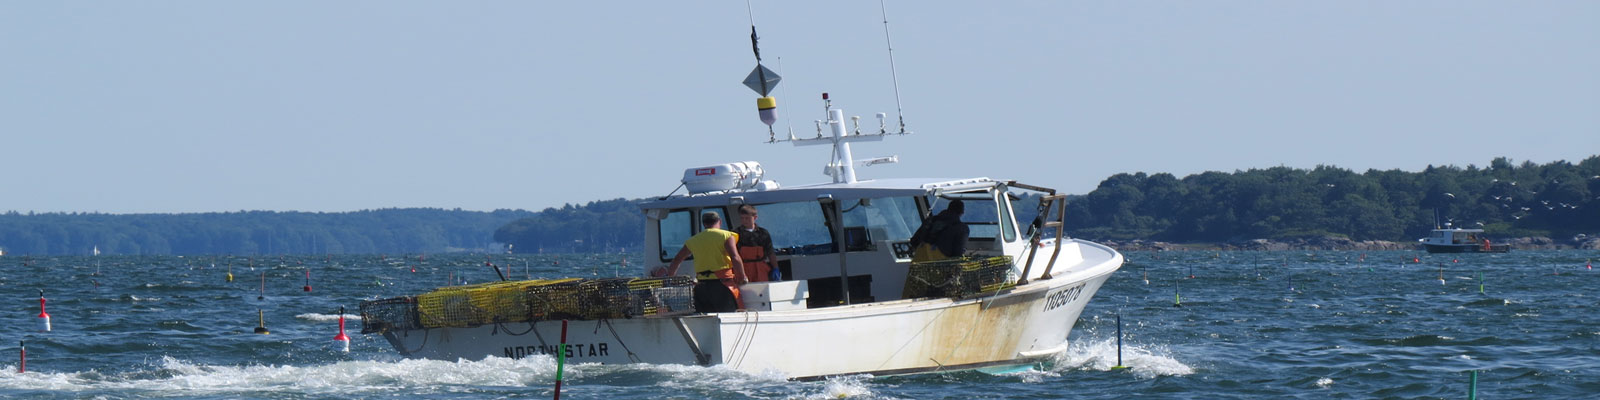 Experiencing Maine as Only Boaters Can